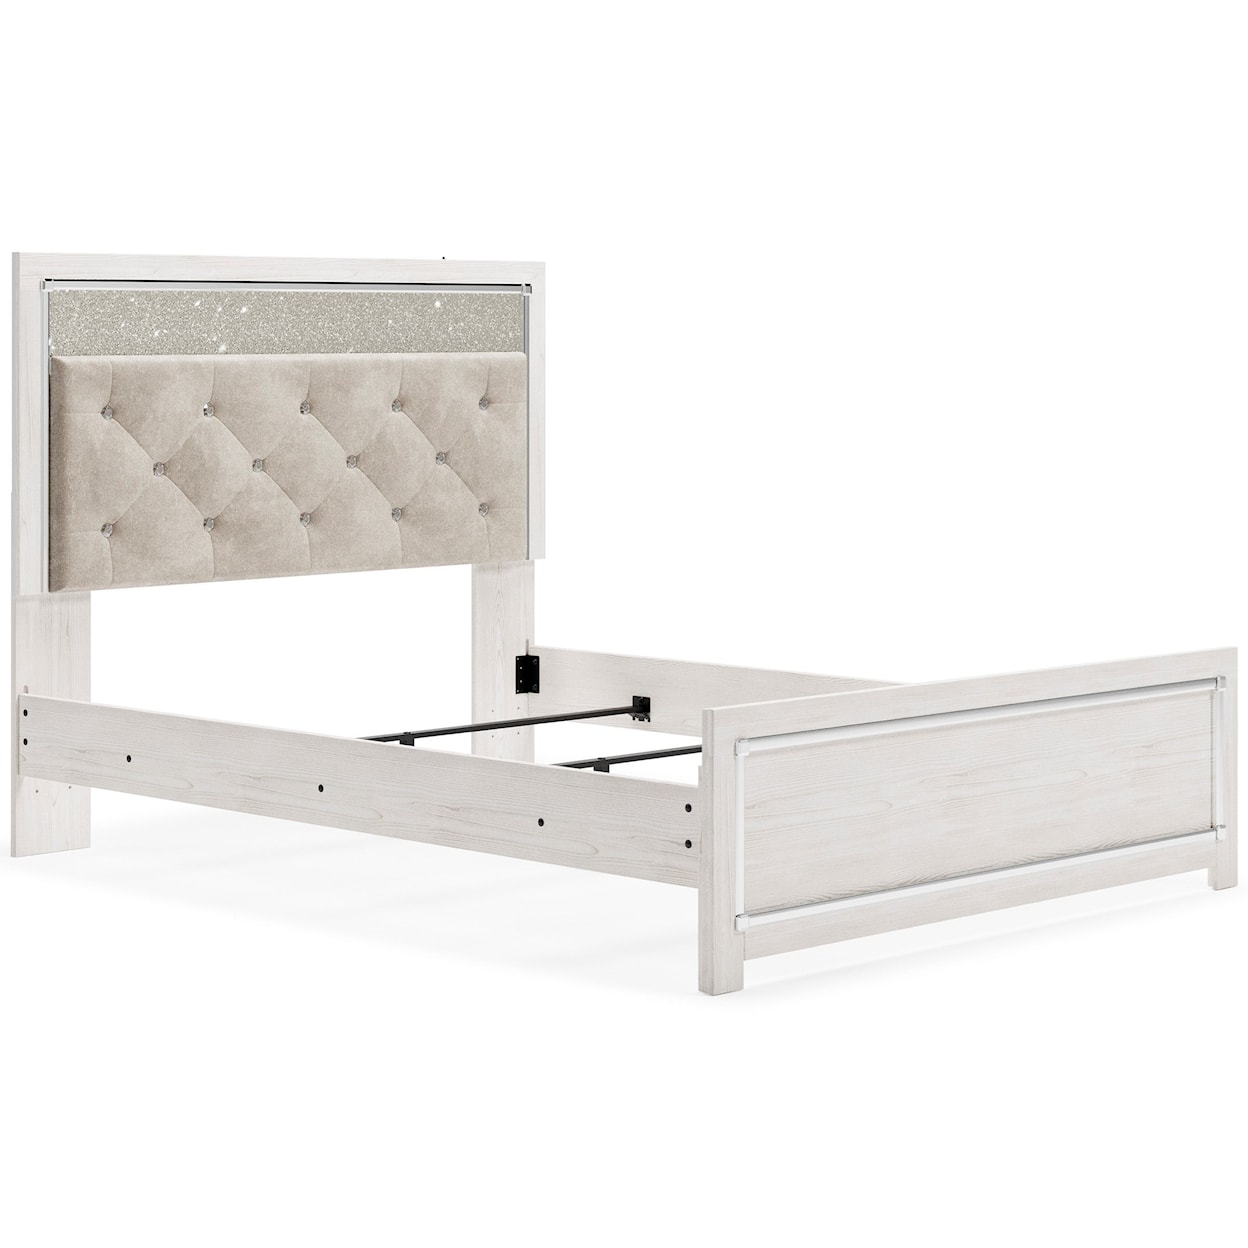 Signature Design Altyra Queen Upholstered Panel Bed